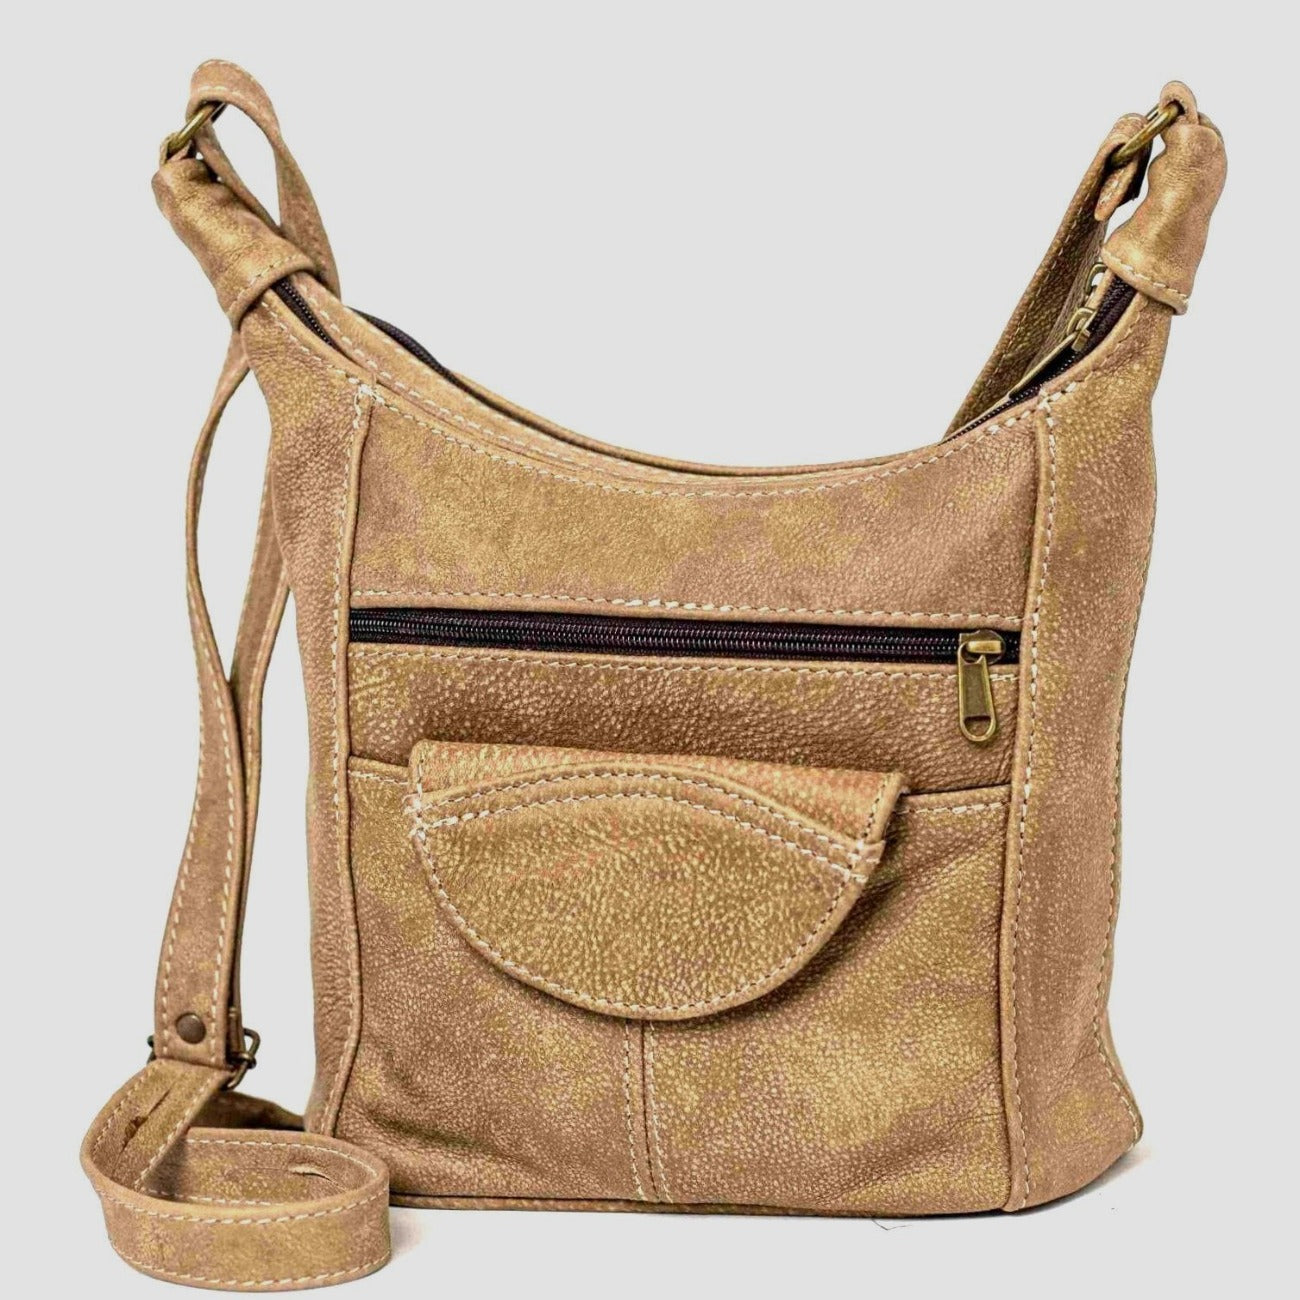 SH medium leather bags in rustic sand made by  cape Masai Leather